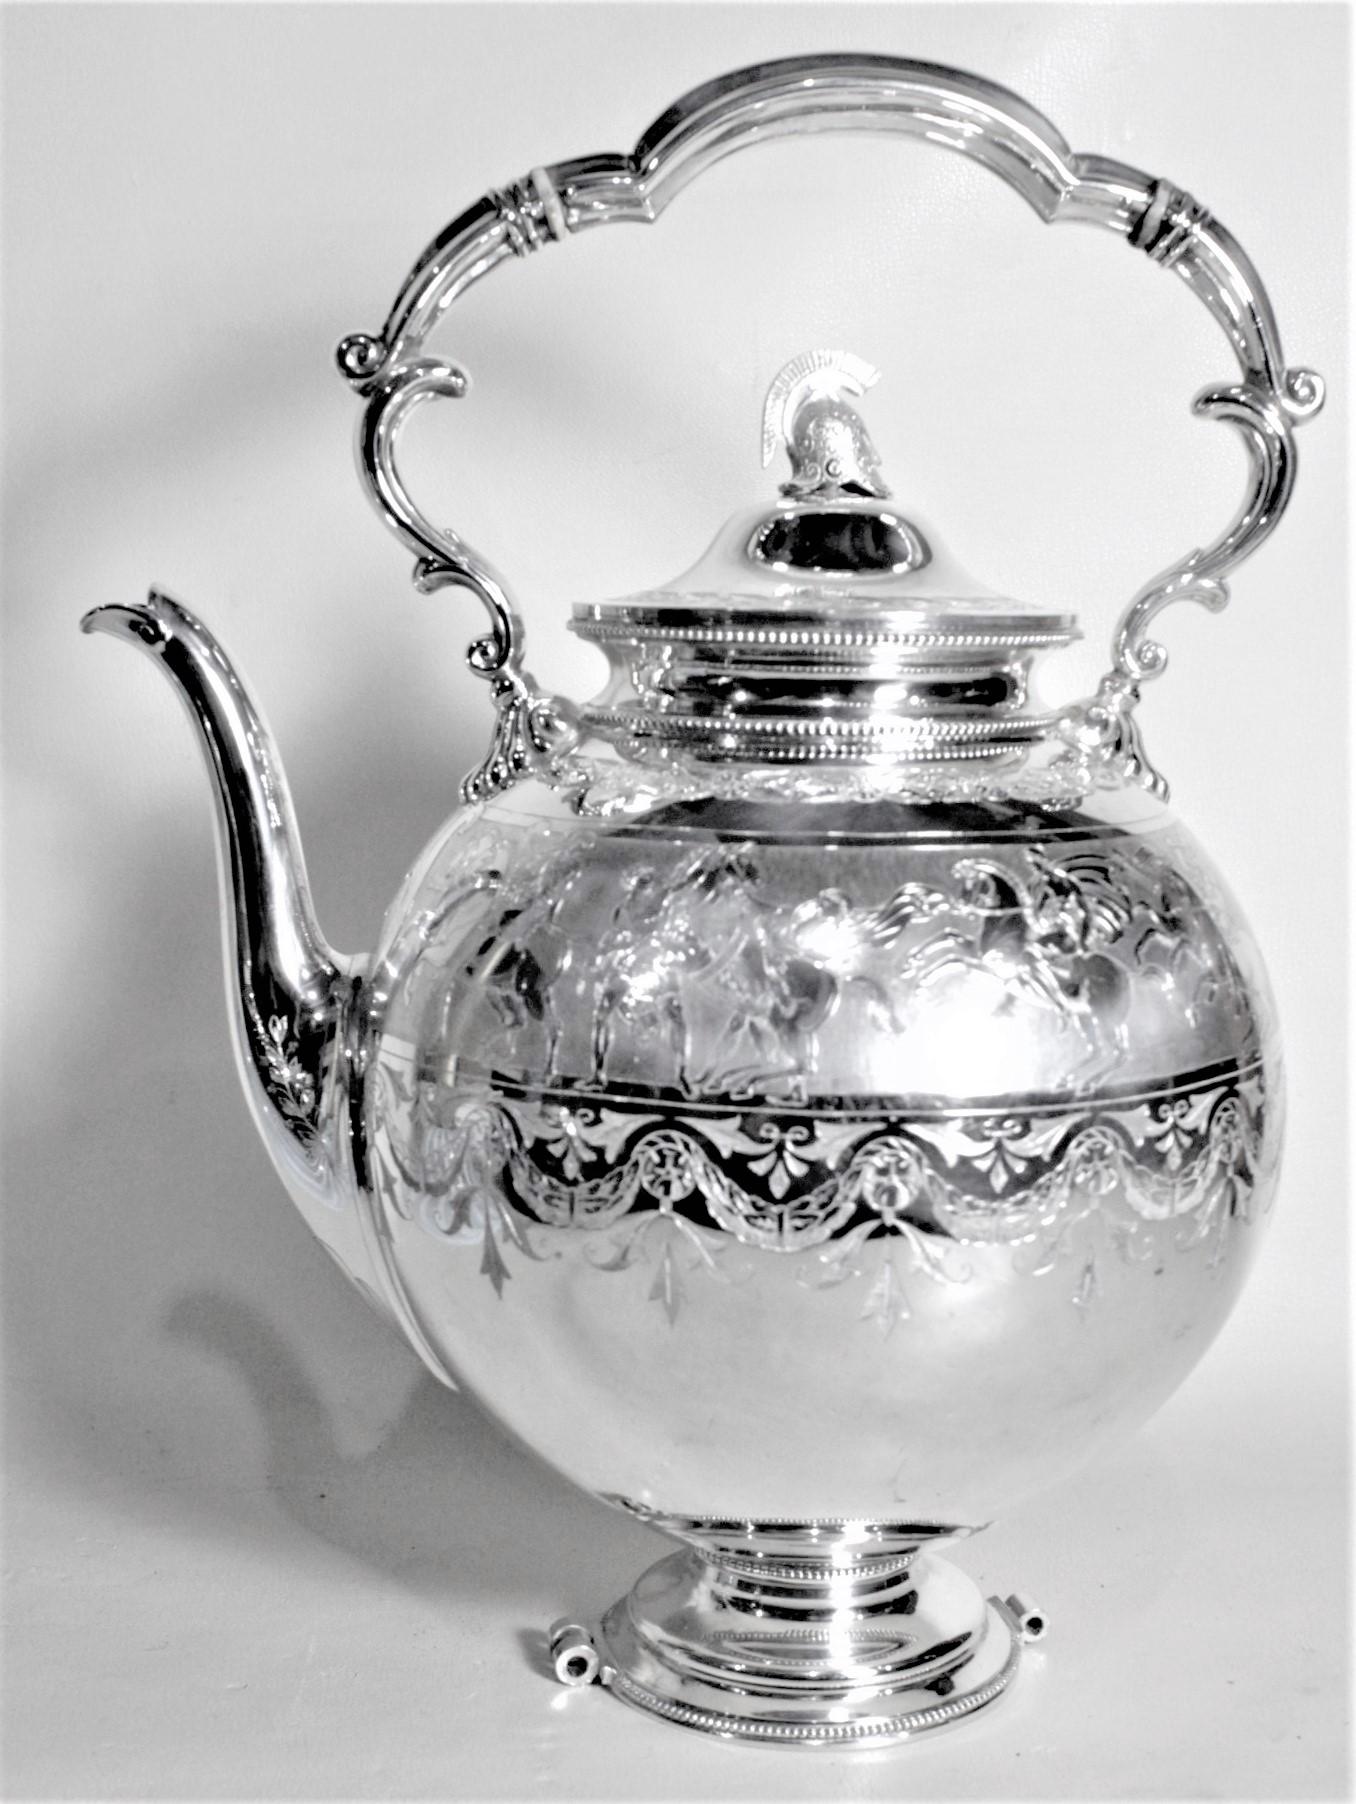 20th Century Antique English Silver Plated Tipping Teapot or Kettle with Helmut Top and Stand For Sale